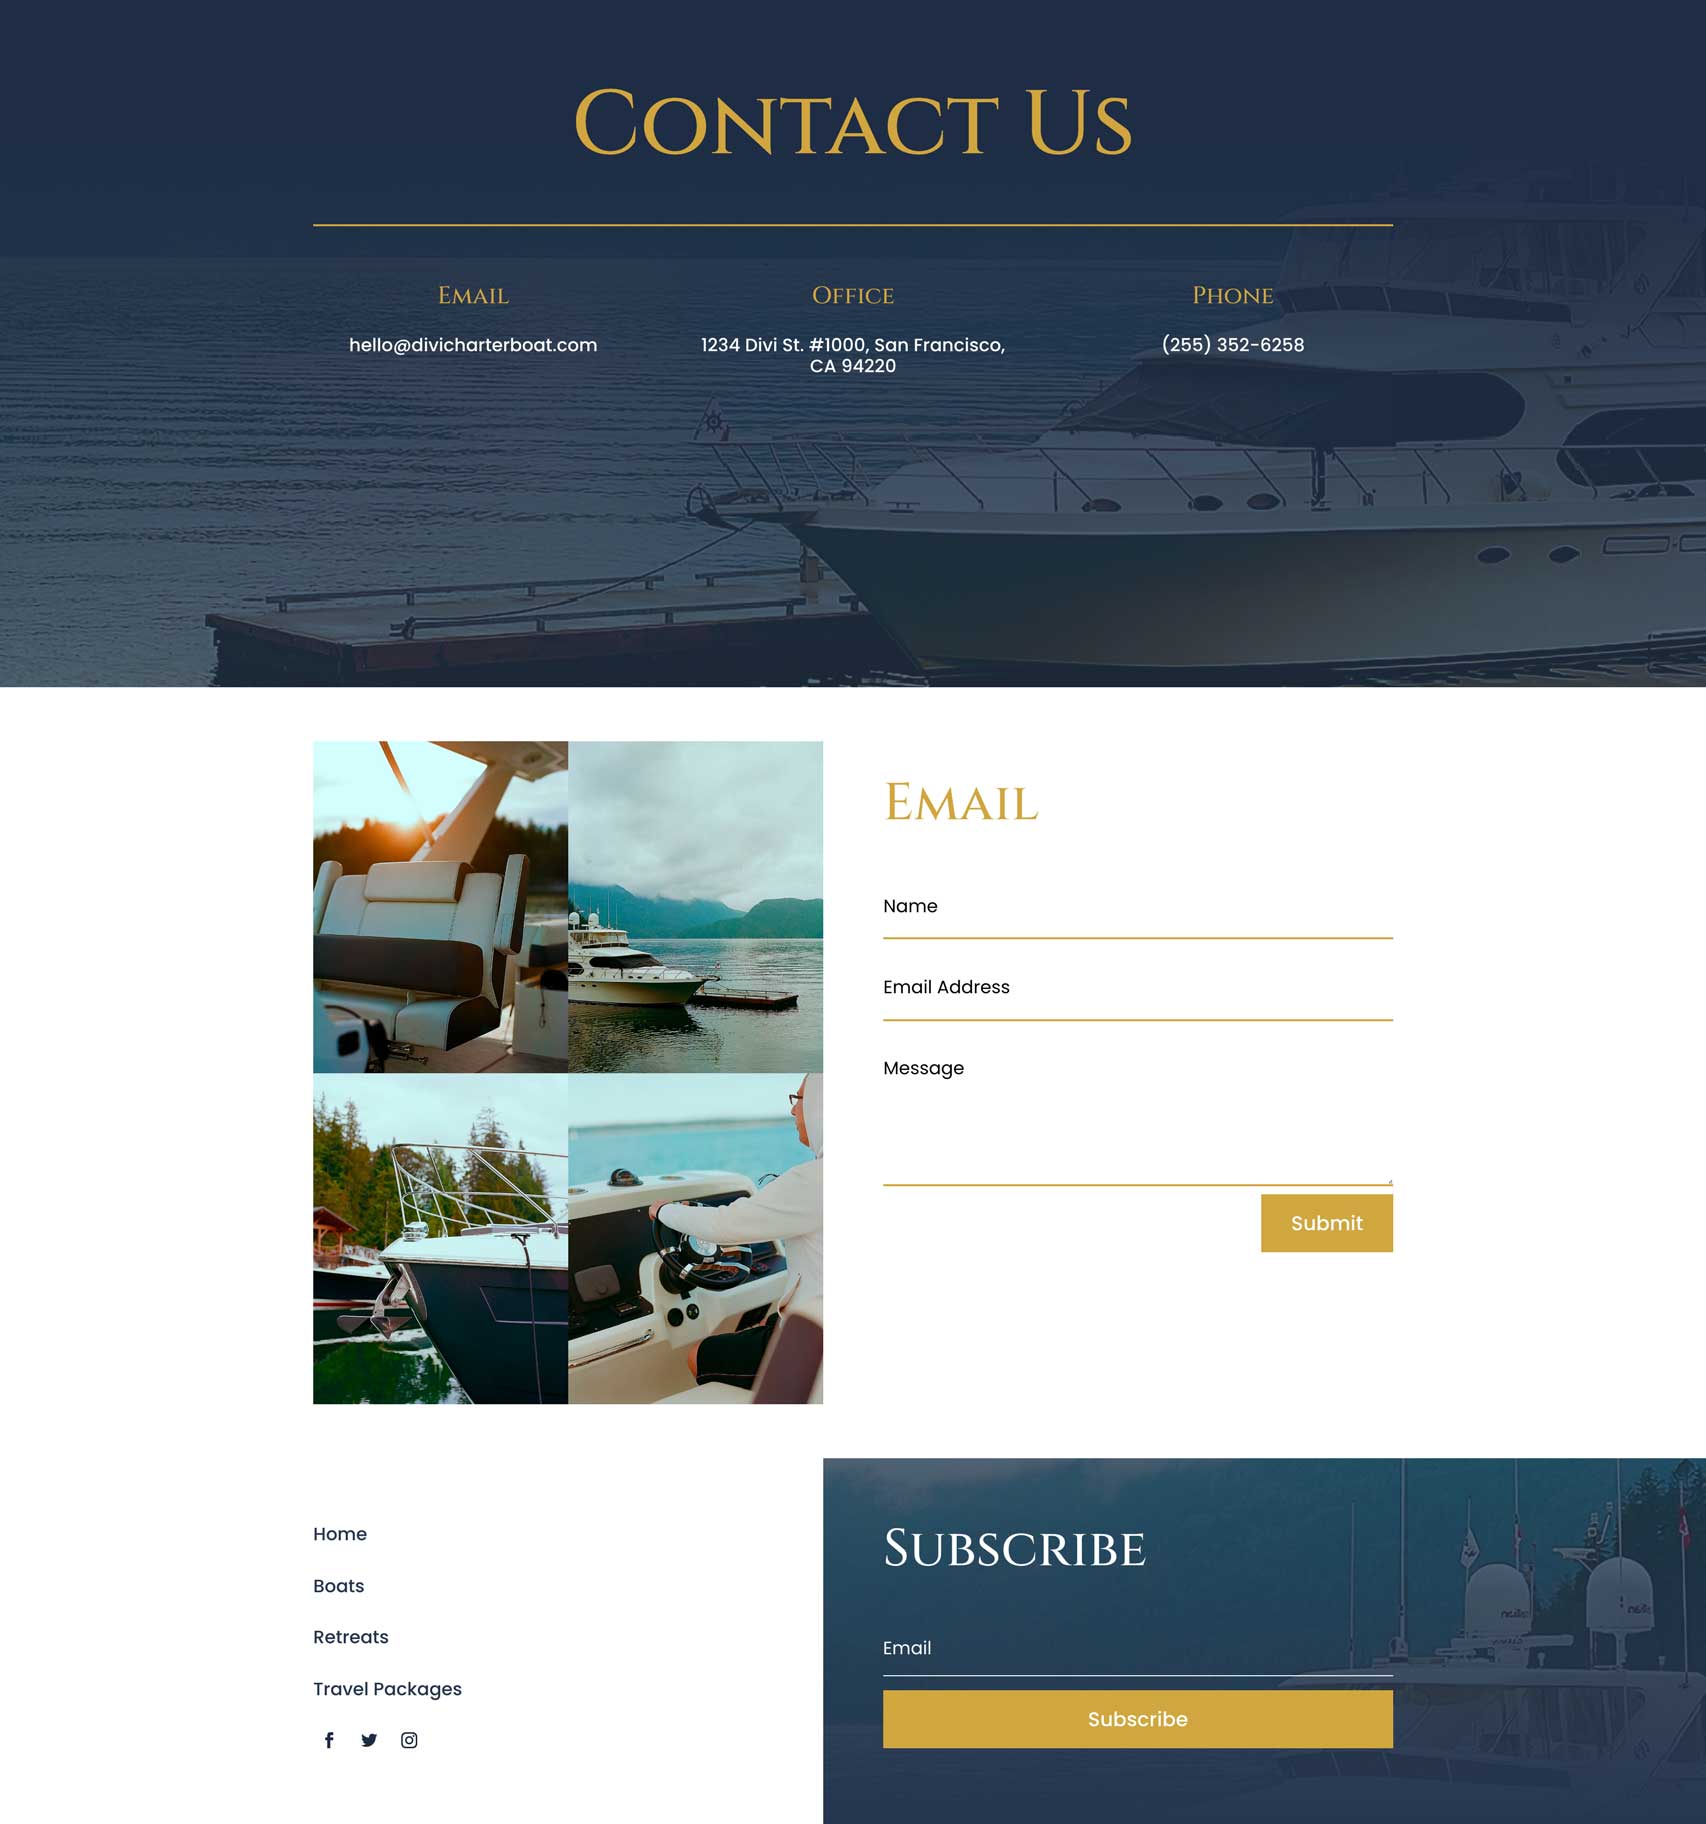 Charter Boat Layout Pack for Divi